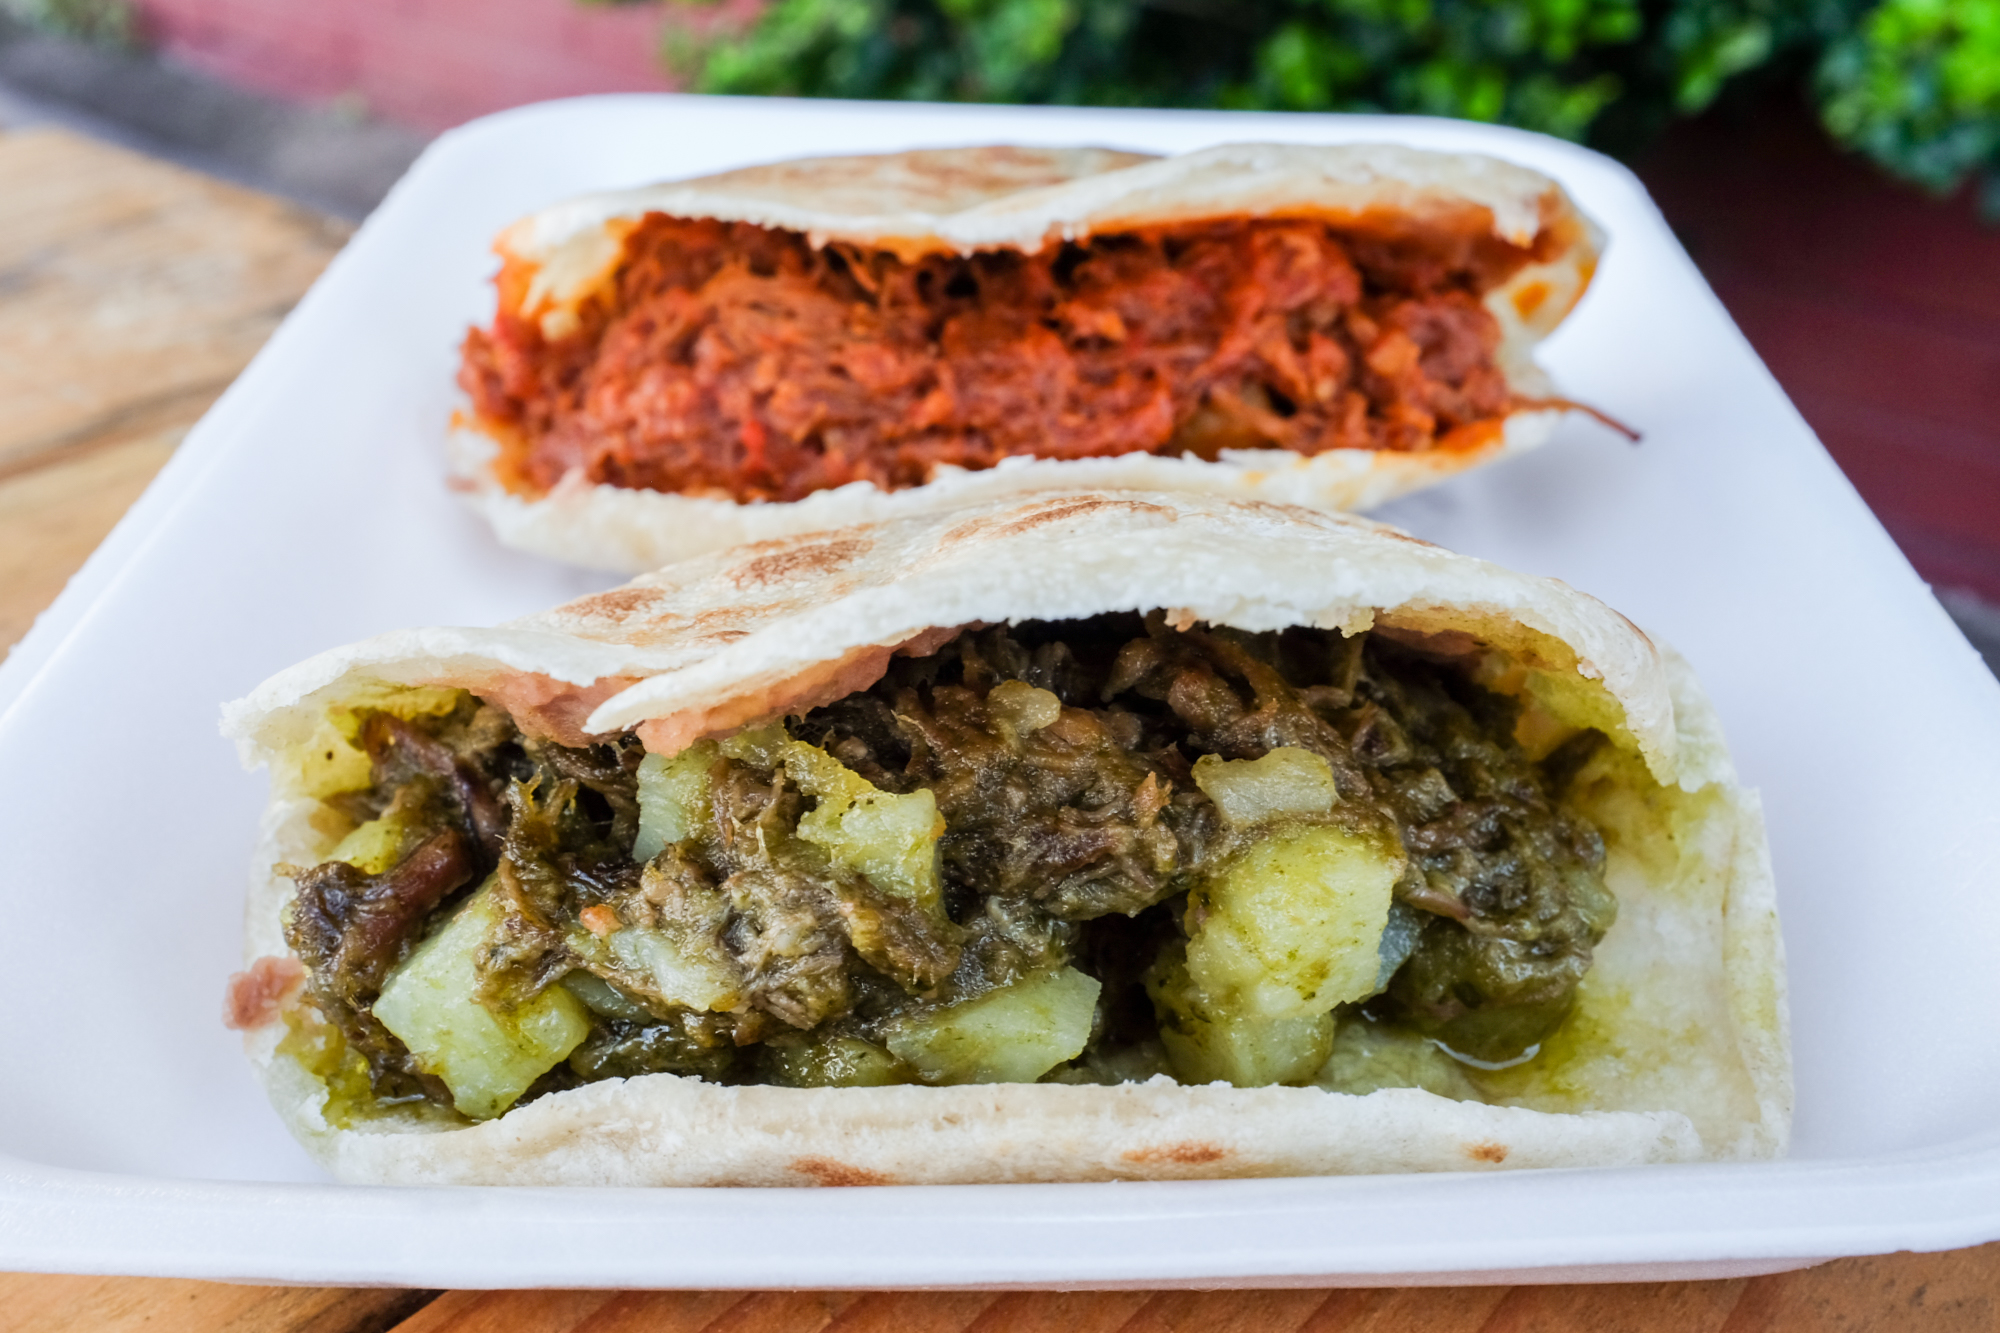 A gordita stuffed with bright red meat and another stuffed with green salsa verde meat and a white rectangular plate.